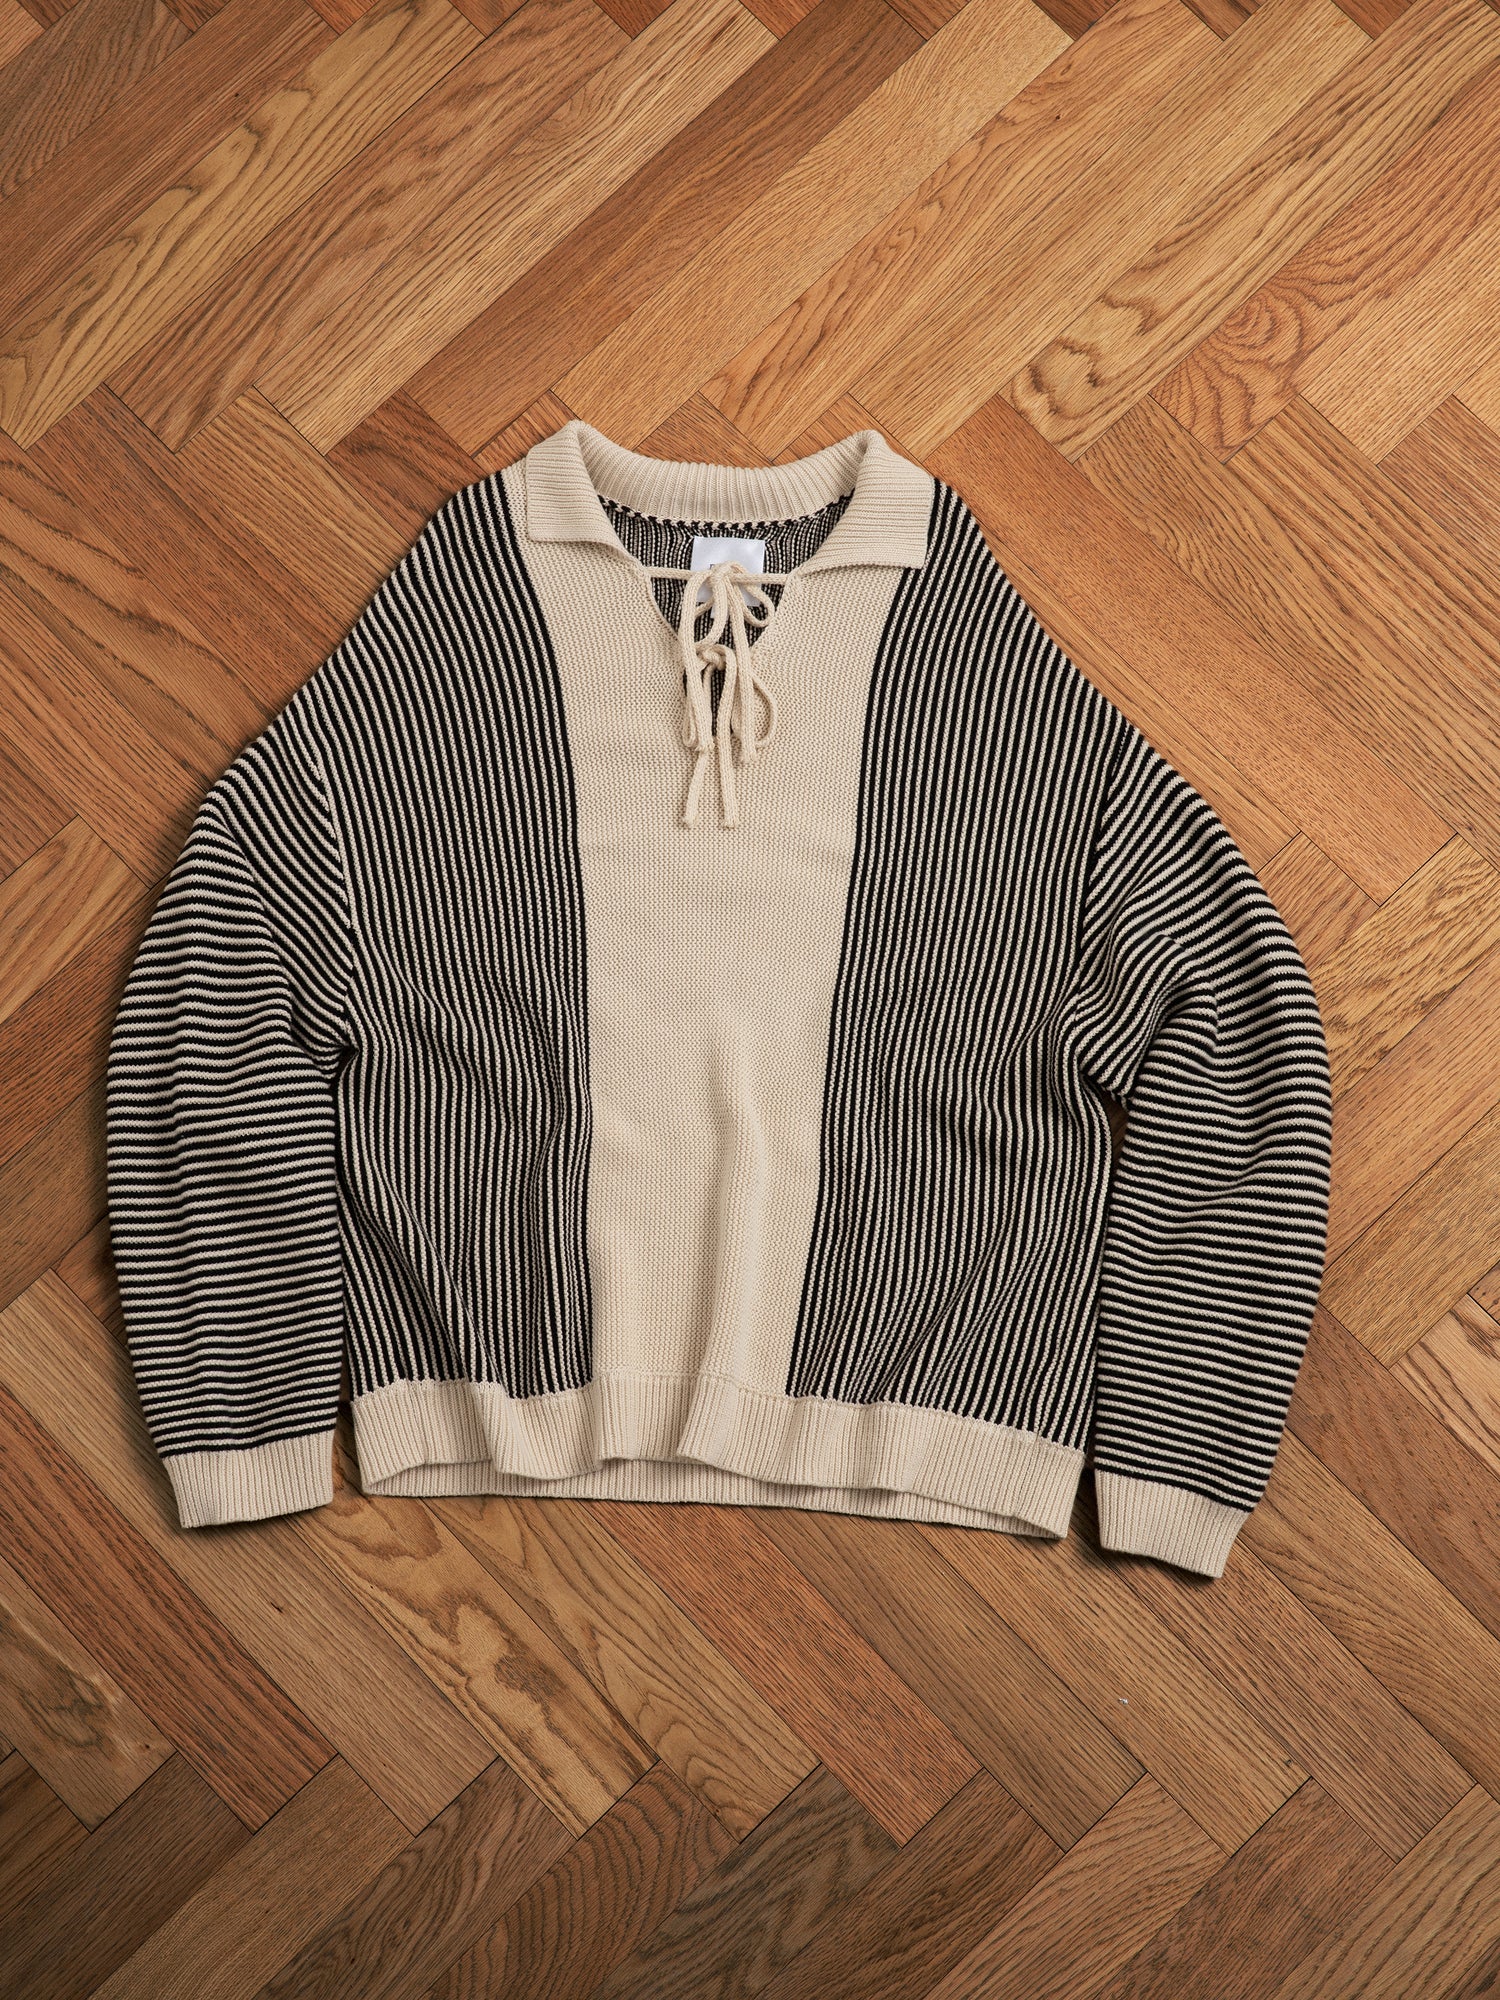 A Tabas Tie Knit Collared Sweater with intricate knit patterns on a wooden floor.